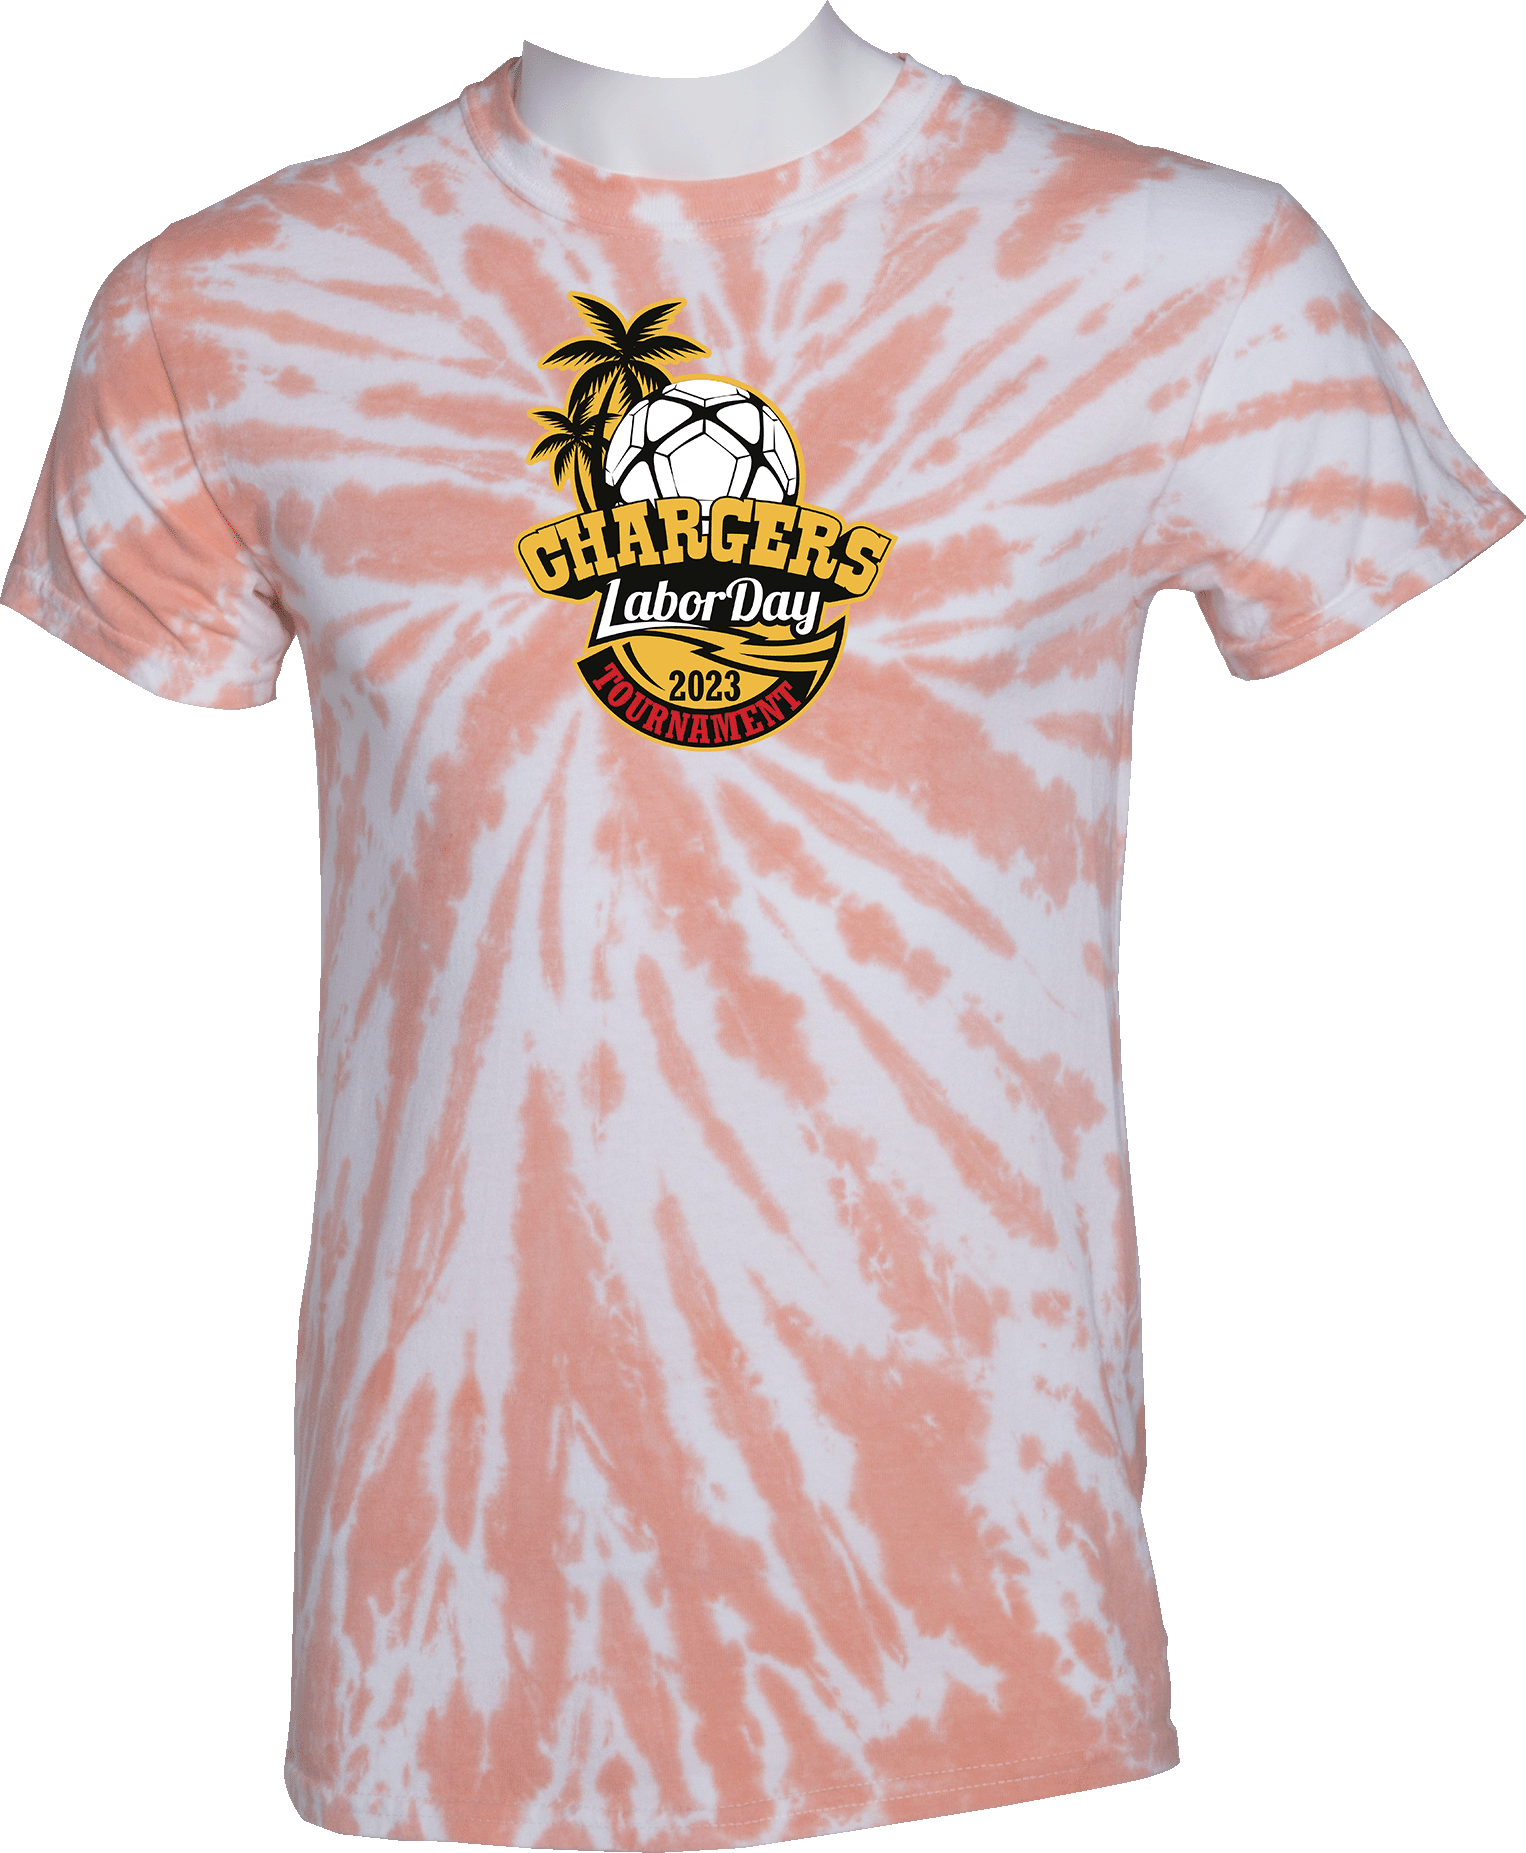 Tie-Dye Short Sleeves - 2023 Chargers Labor Day Tournament